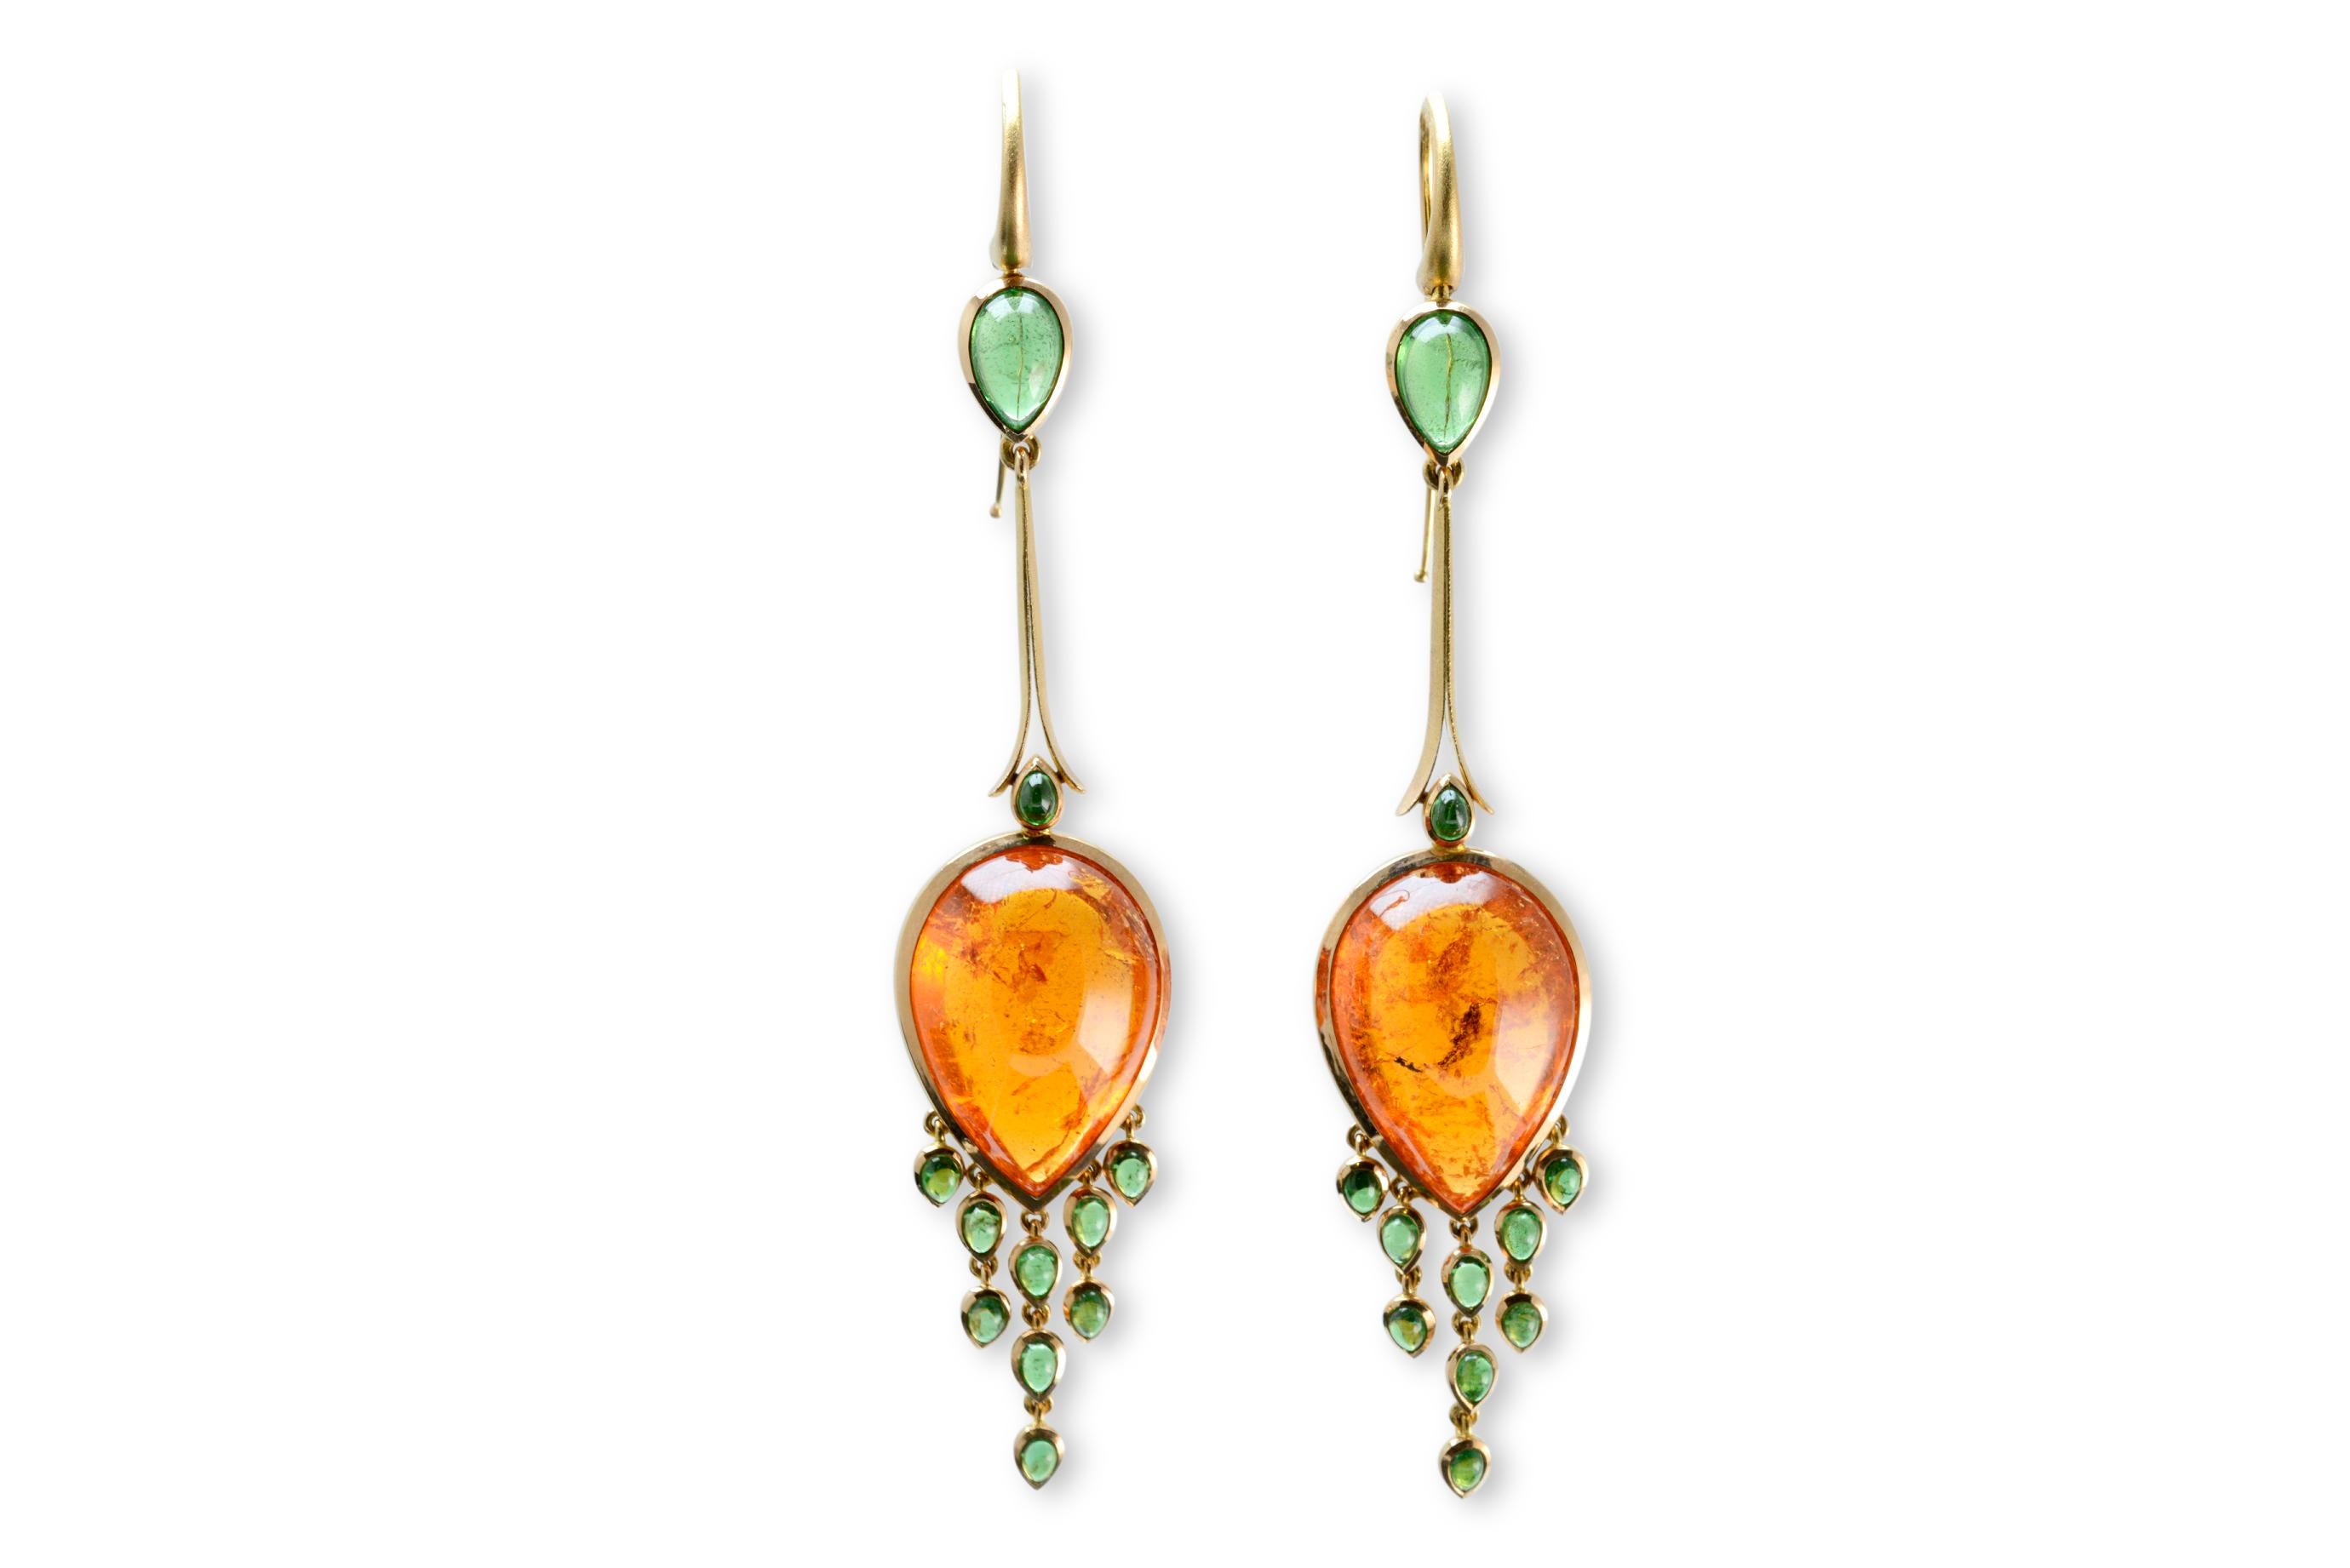 Hand picked for their luminous beauty is a pair of pear shaped mandarin garnets. They have been delicately framed in handmade 18 carat rose gold bezels. Specially cut pear shaped tsavorite garnets form tassels that dangle from the bottom. An